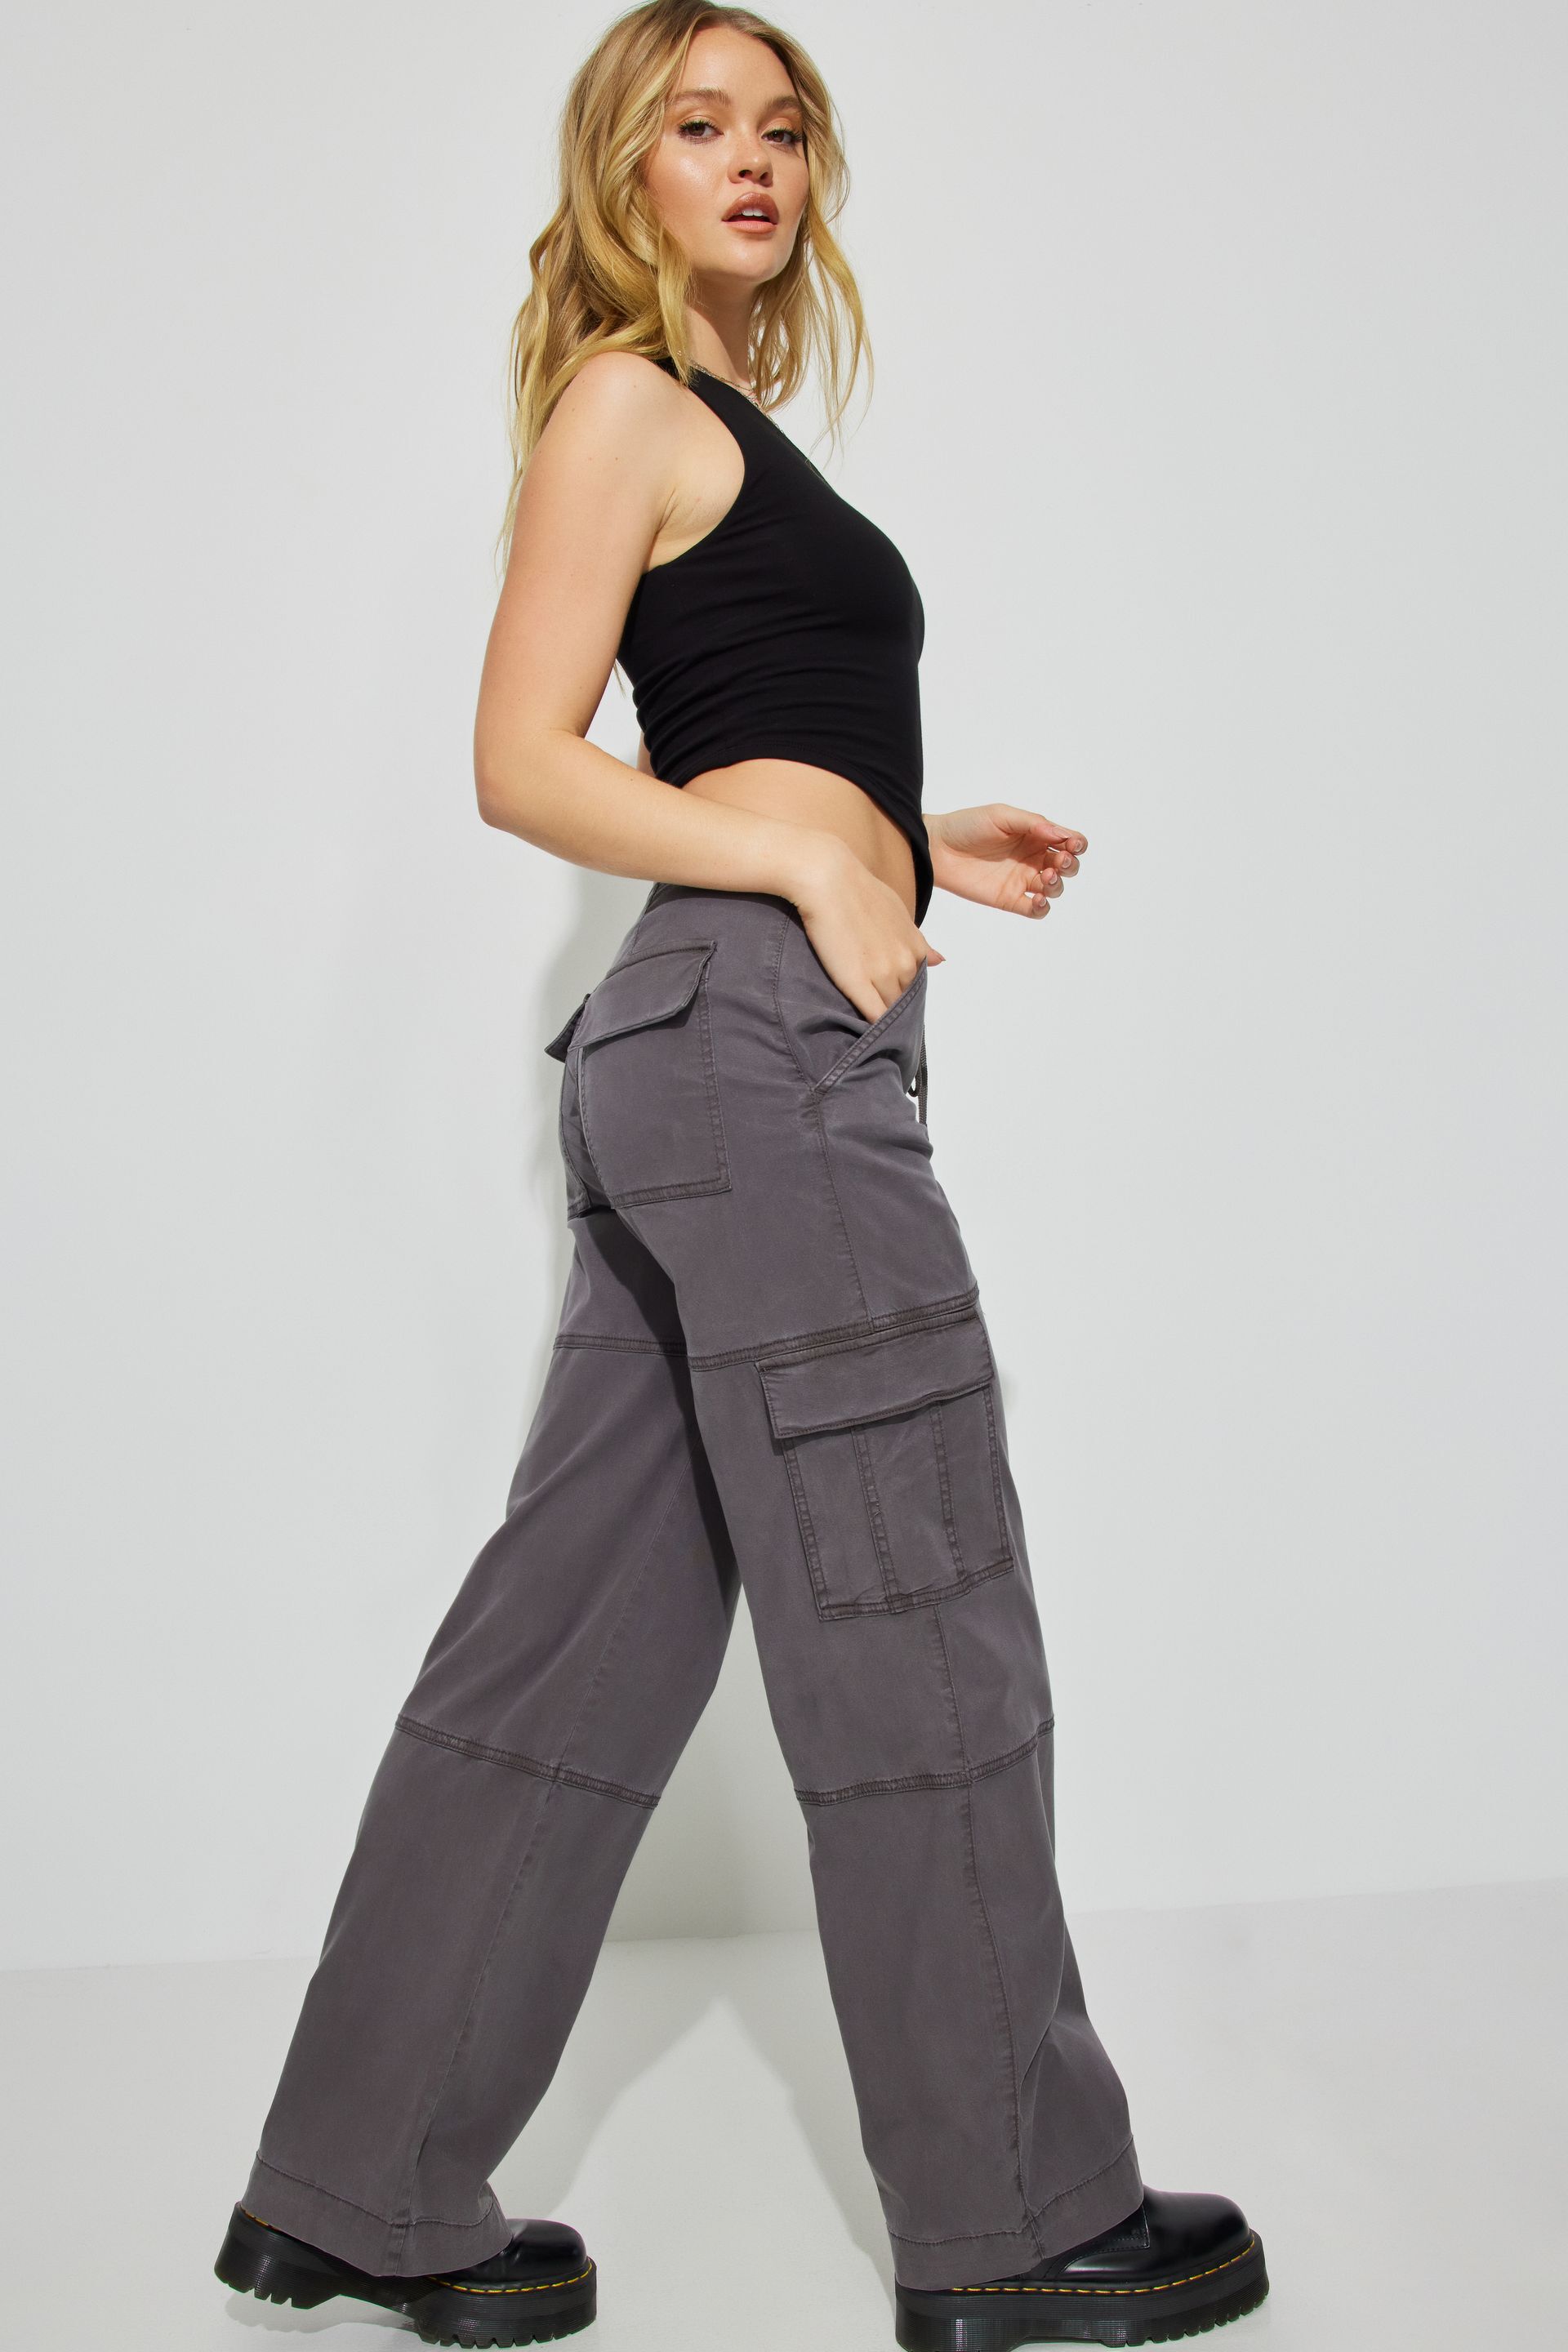 Stylish Grey Cargo Pants Outfit for Summer